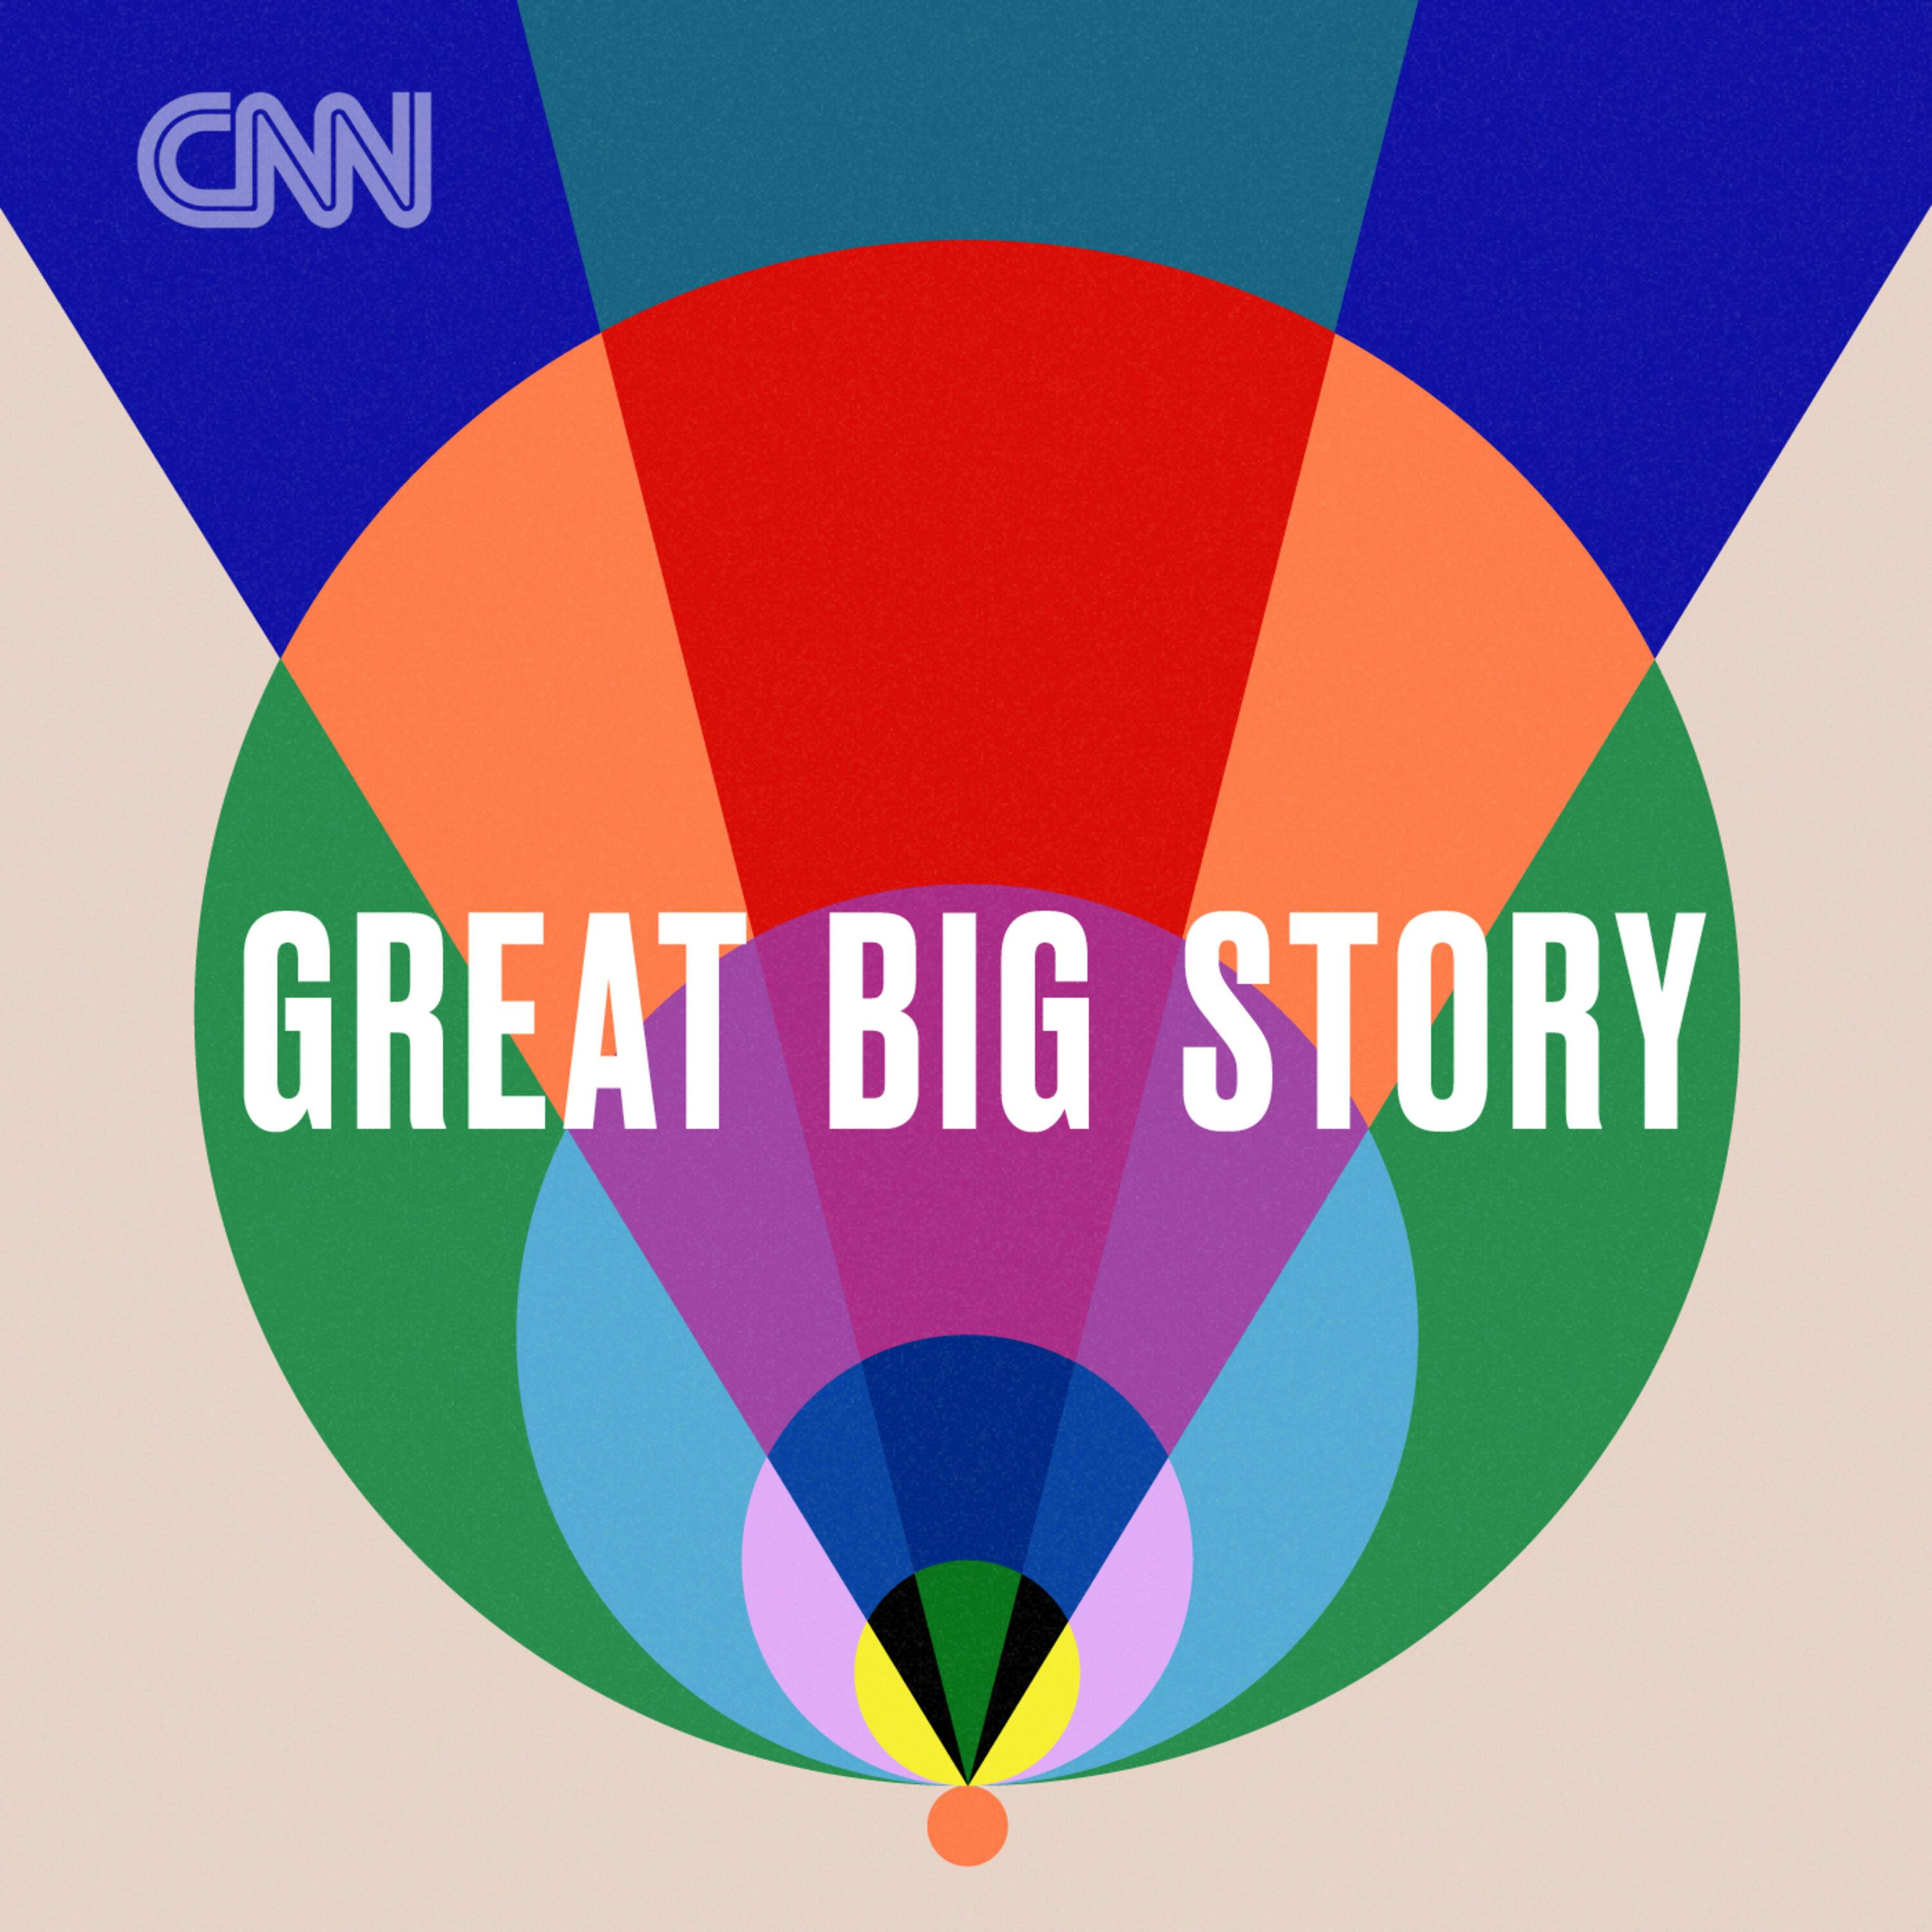 Introducing Great Big Story